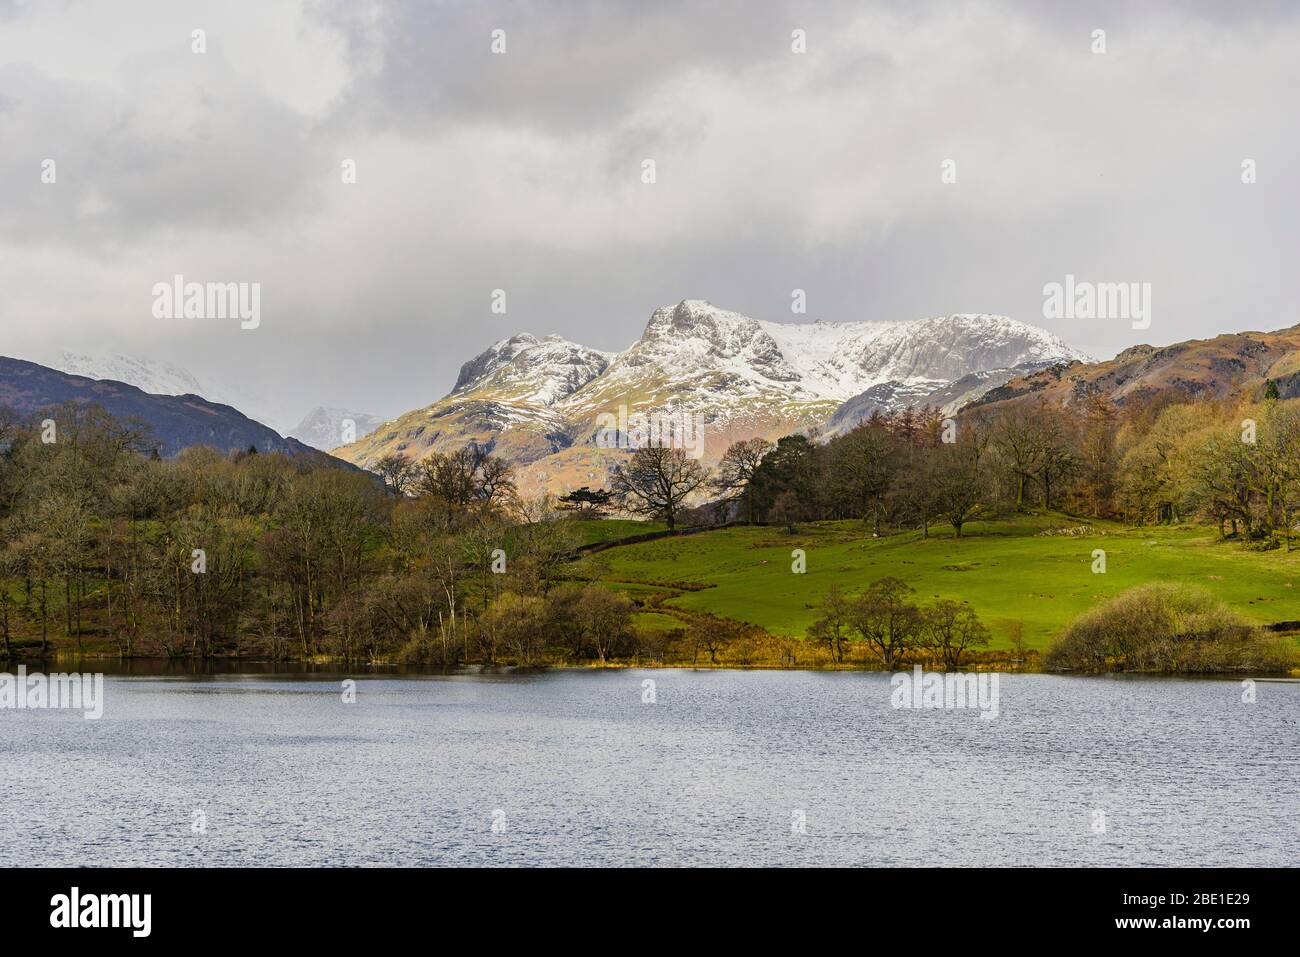 Loughrigg Tarn and the Langdale Pikes in the English Lake District Stock Photo